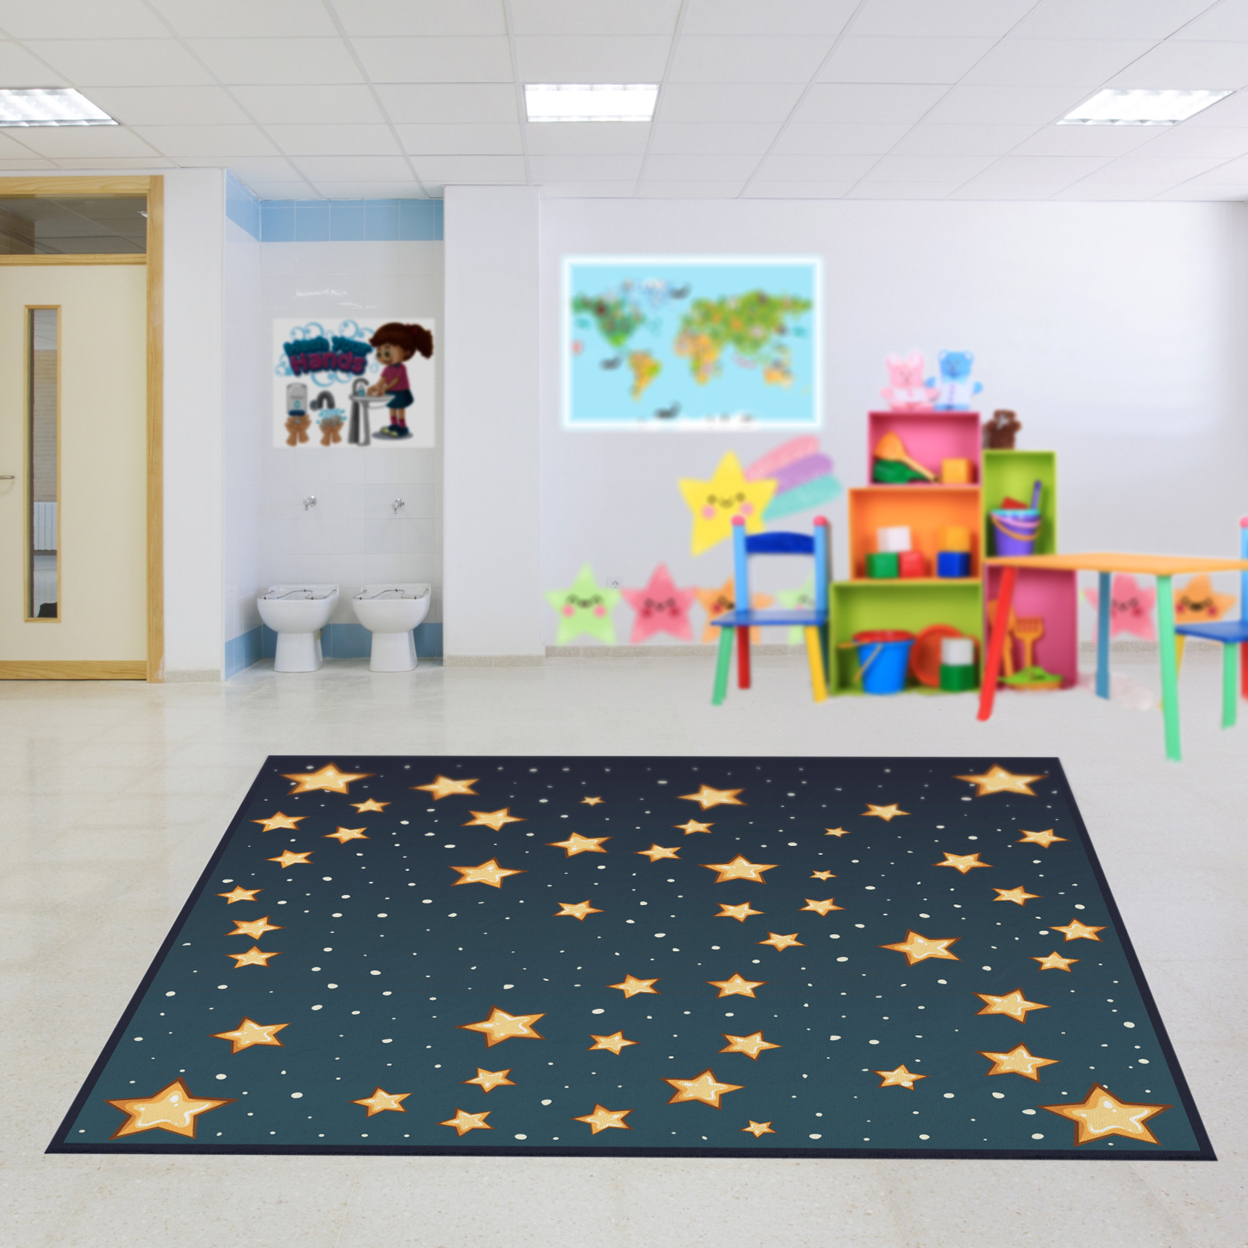 Deerlux 6 Ft. Social Distancing Colorful Kids Classroom Seating Area Rug, Starry Sky Design - Extra Large